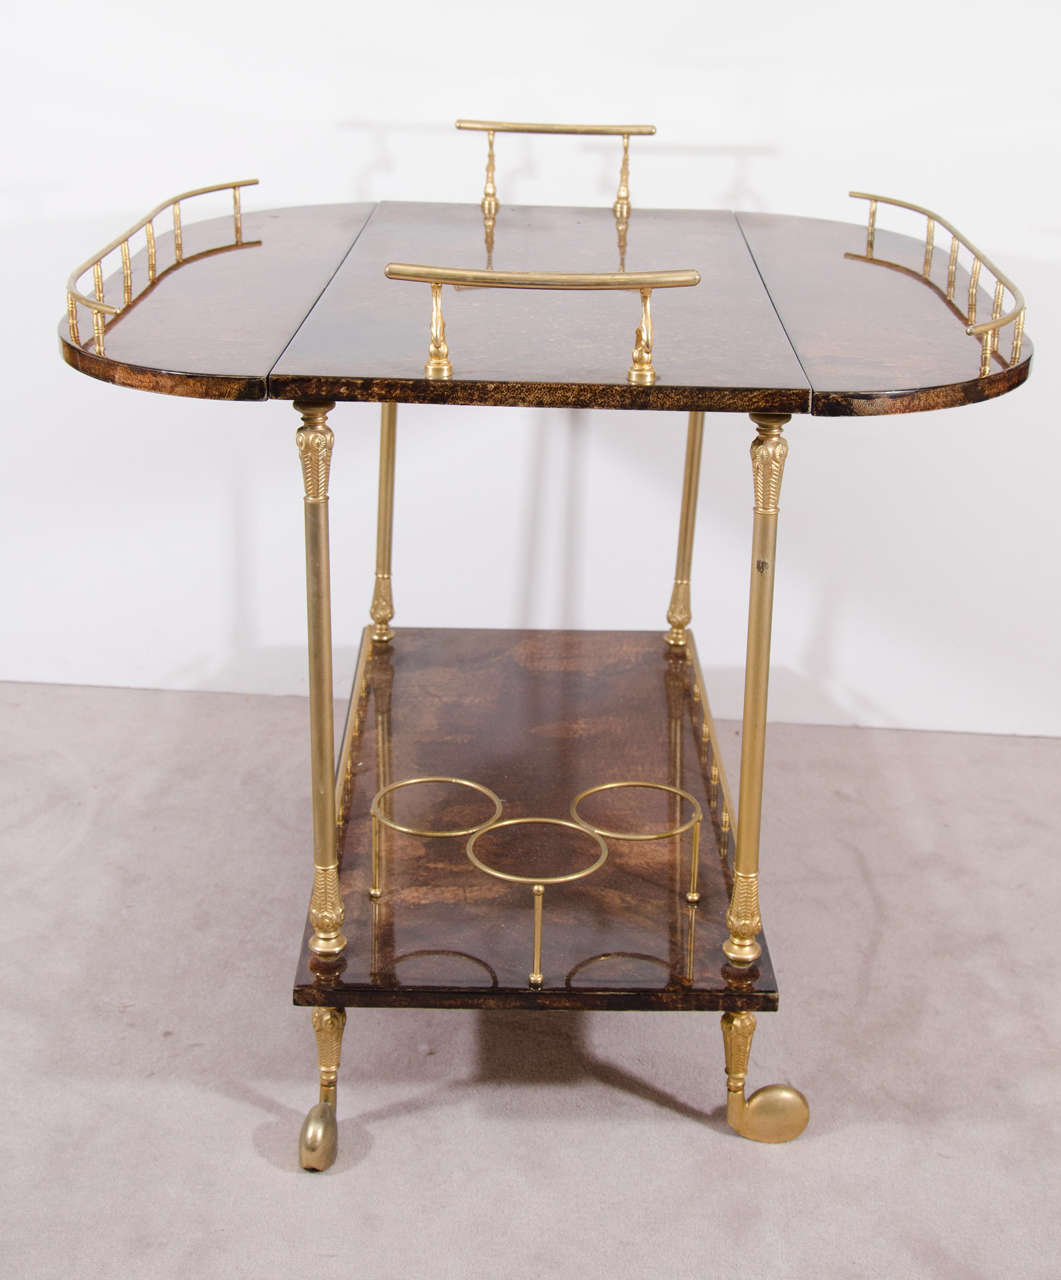 Aldo Tura Bar cart in brass and Deep Marbelized Brown Lacquered Goatskin with Galleried top and three wine or bottle holders on the Bottom Tier.

Dimensions closed: 
H 30